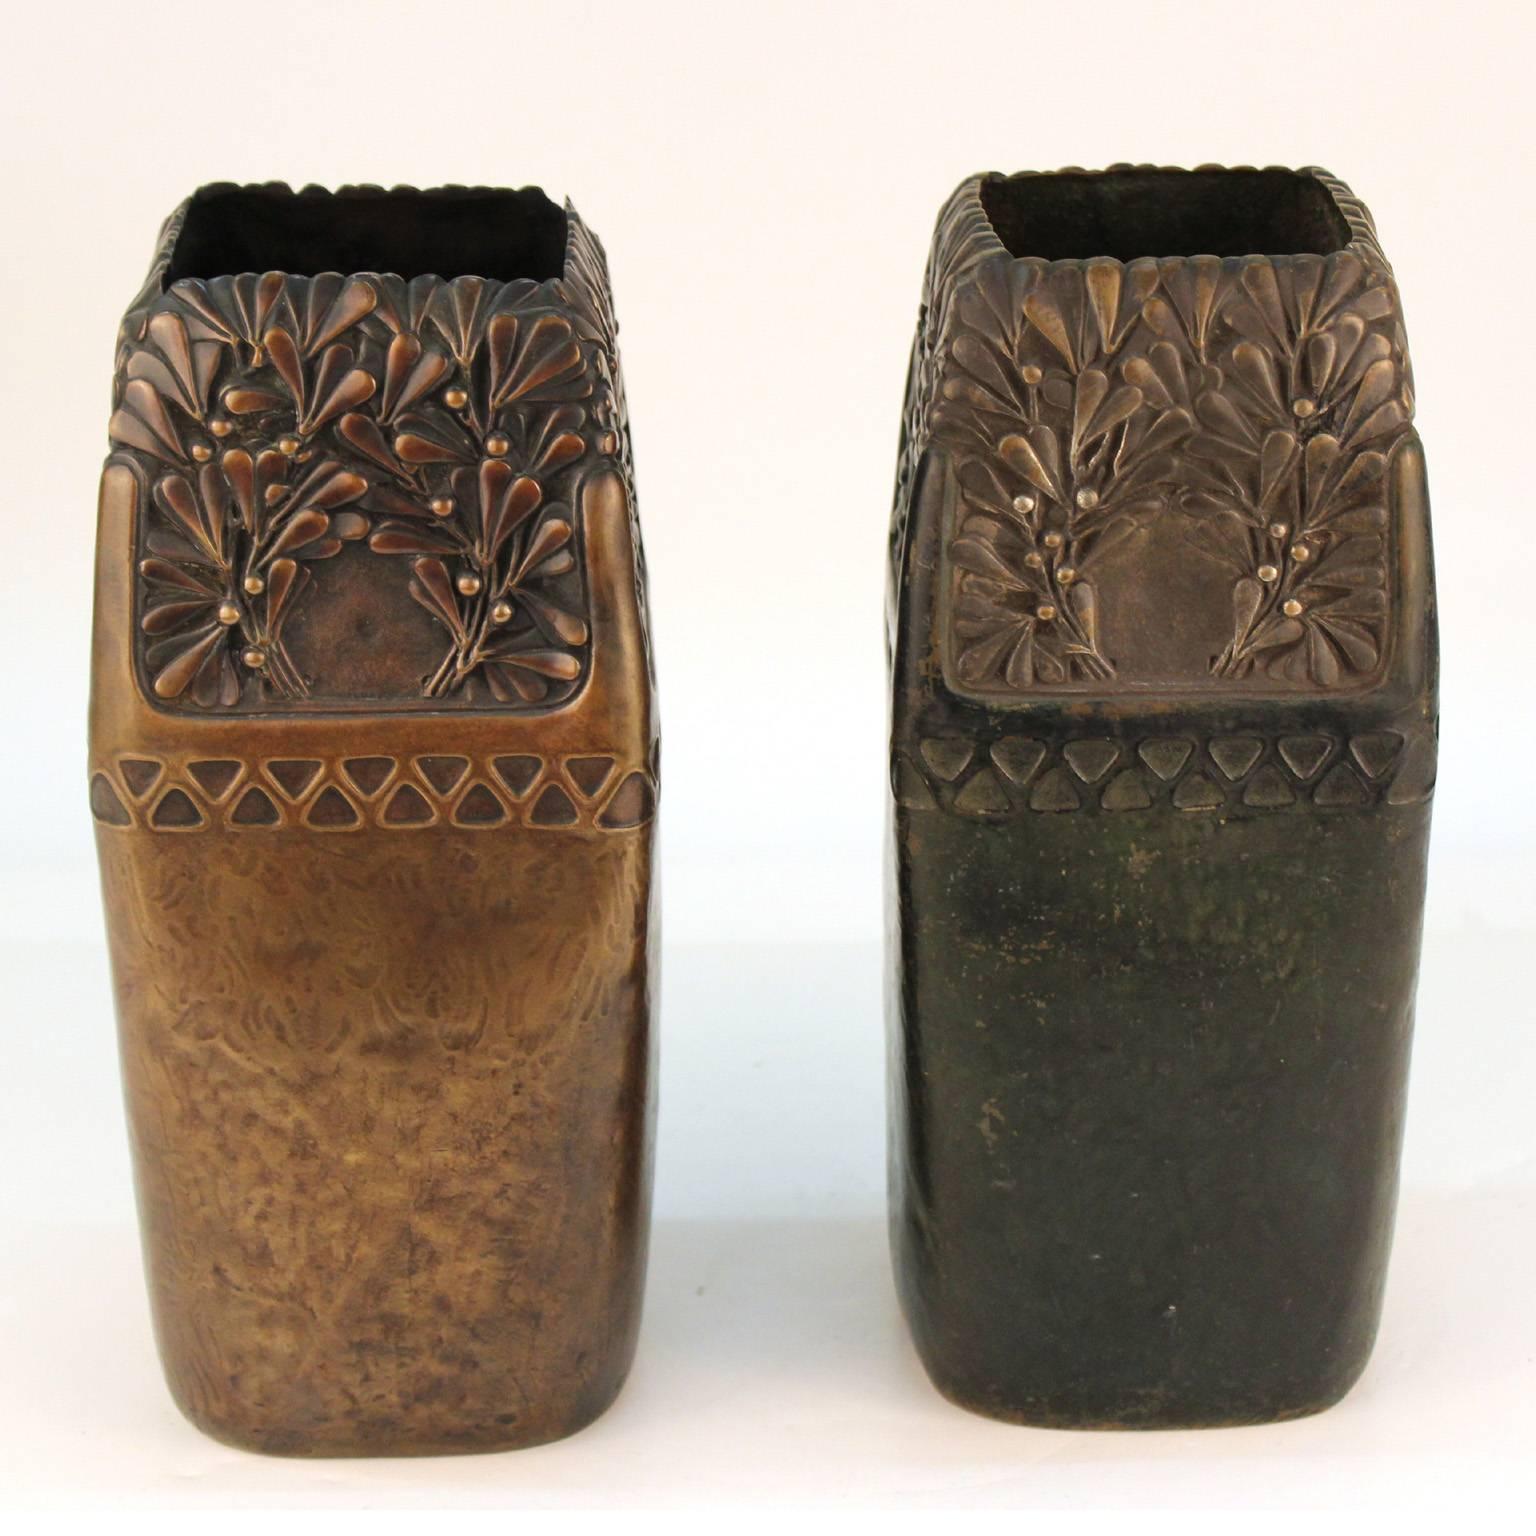 A pair of decorative vases in patinated bronze, made by celebrated Austrian sculptor and founding member of the Vienna Secession Gustav Gurschner (1873-1970). Marked 'Made in Austria, WKE [Wiener Kunst-Erzgiesserei] 504/111' on bottom, with One vase